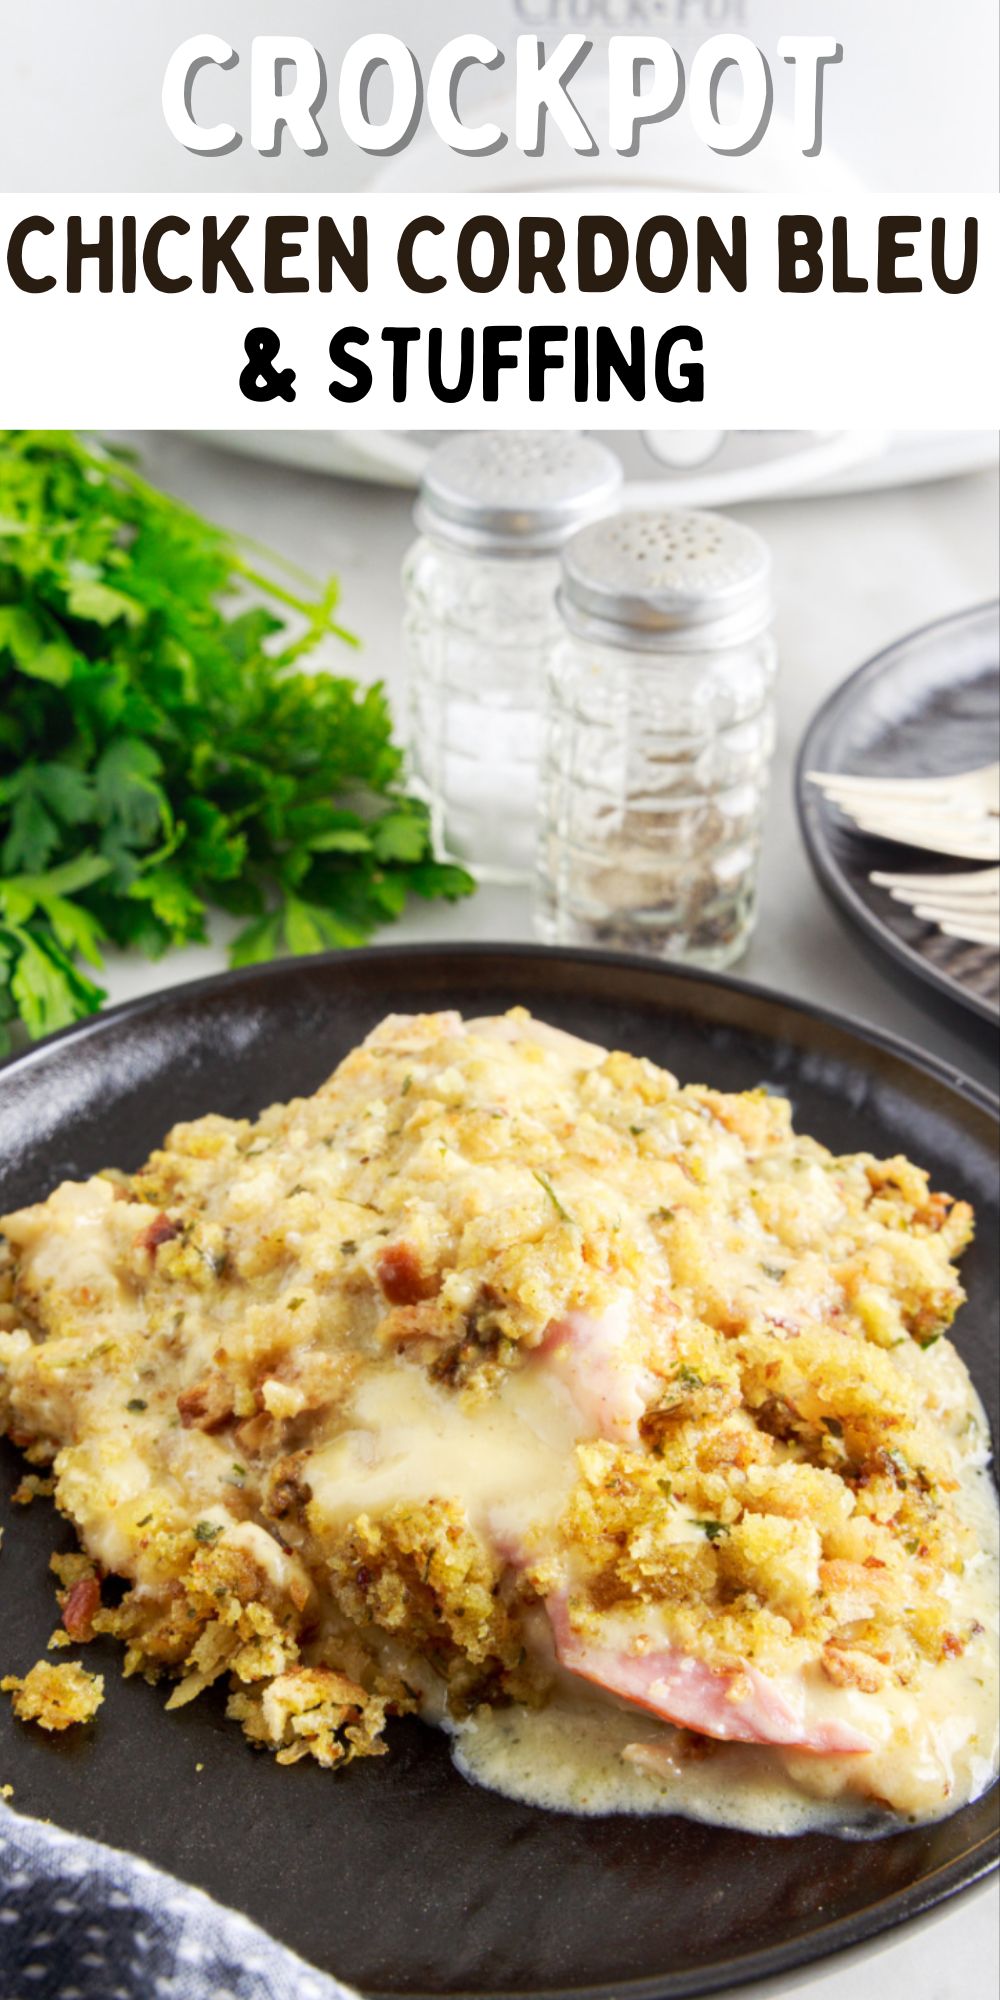 Crockpot Chicken Cordon Bleu with Stuffing recipe may be a mouthful to say but is incredibly easy to make, thanks to your slow cooker! via @familyfresh